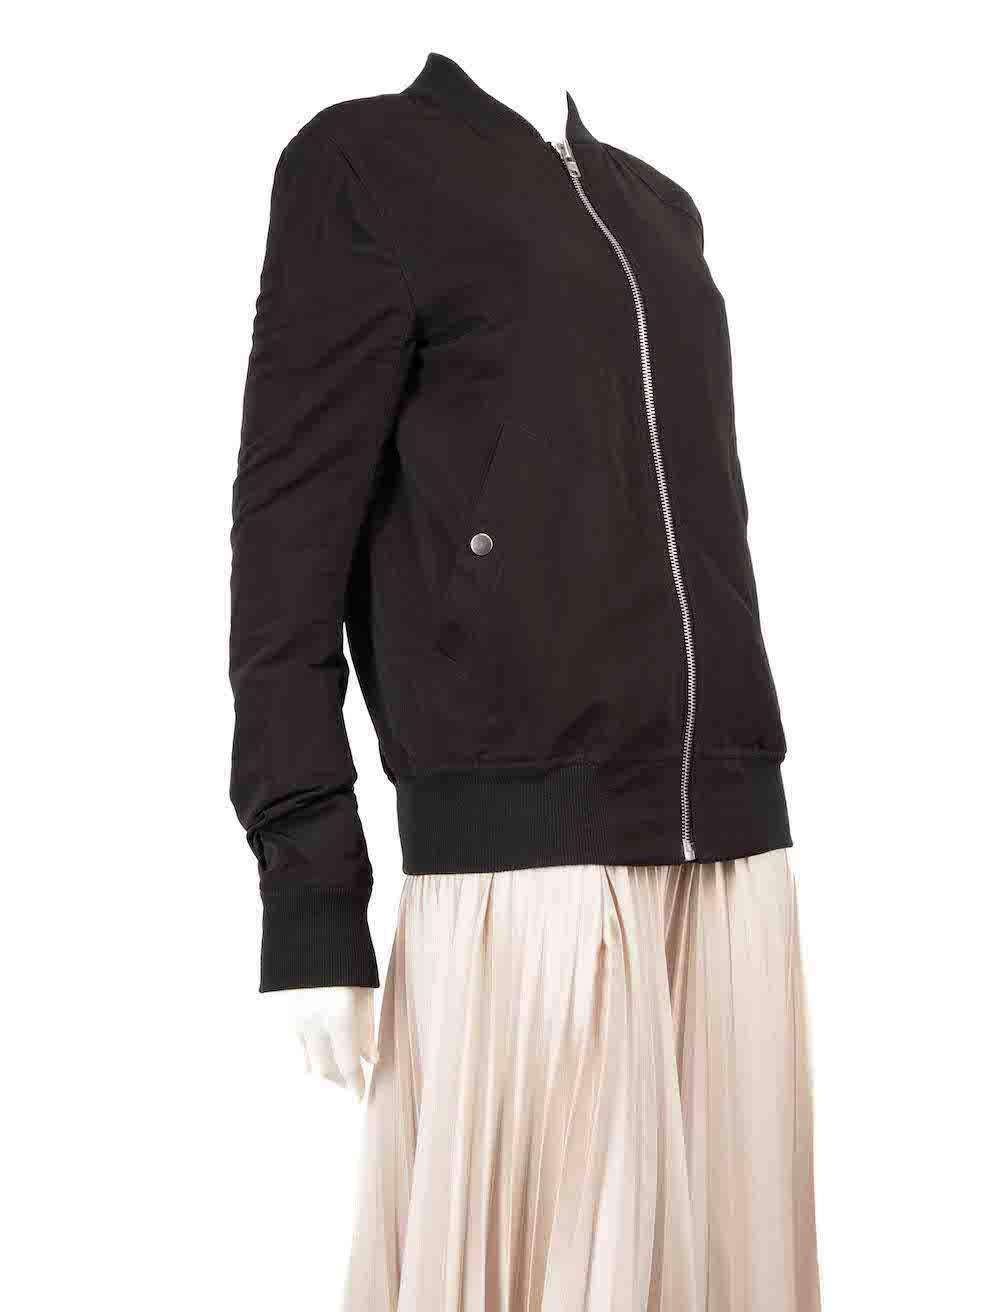 CONDITION is Very good. Hardly any visible wear to Bomber Jacket is evident on this used Rick Owens designer resale item.
 
 
 
 Details
 
 
 Black
 
 Polyester
 
 Bomber jacket
 
 Zip fastening
 
 Rib knit trim
 
 2x Side pockets
 
 1x Sleeve